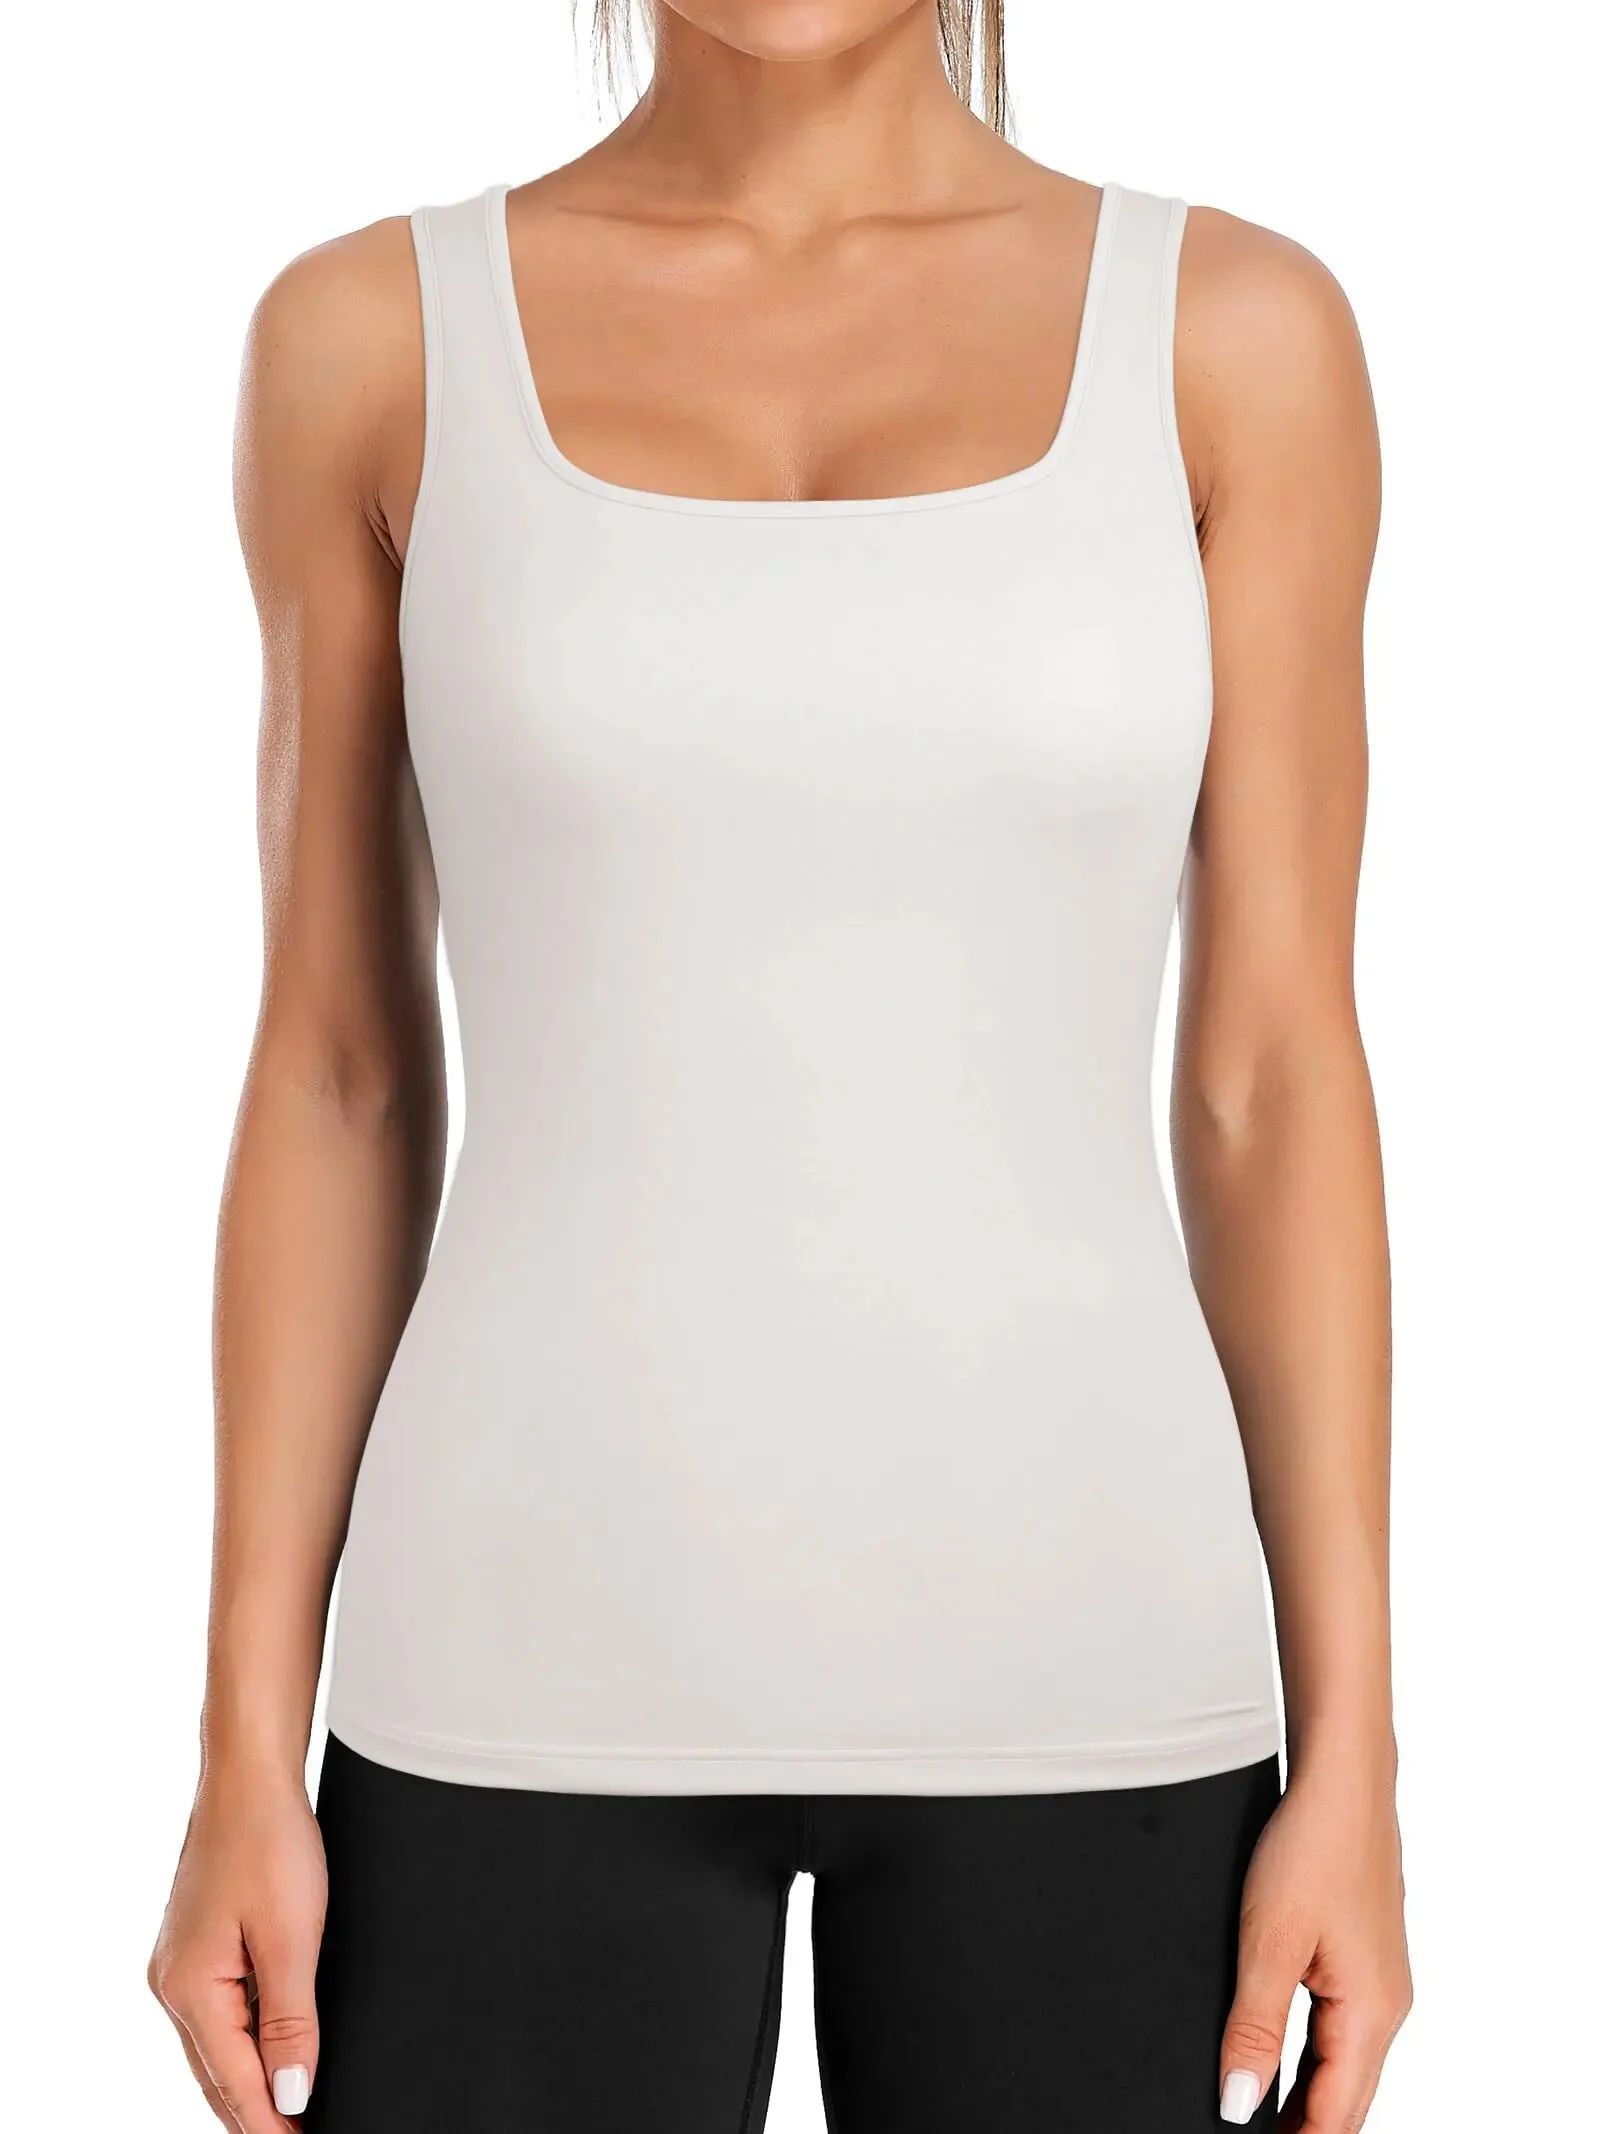 Rosvigor Workout Tank Tops for Women Yoga Summer Tops Dry Fit Shirts | Walmart (US)